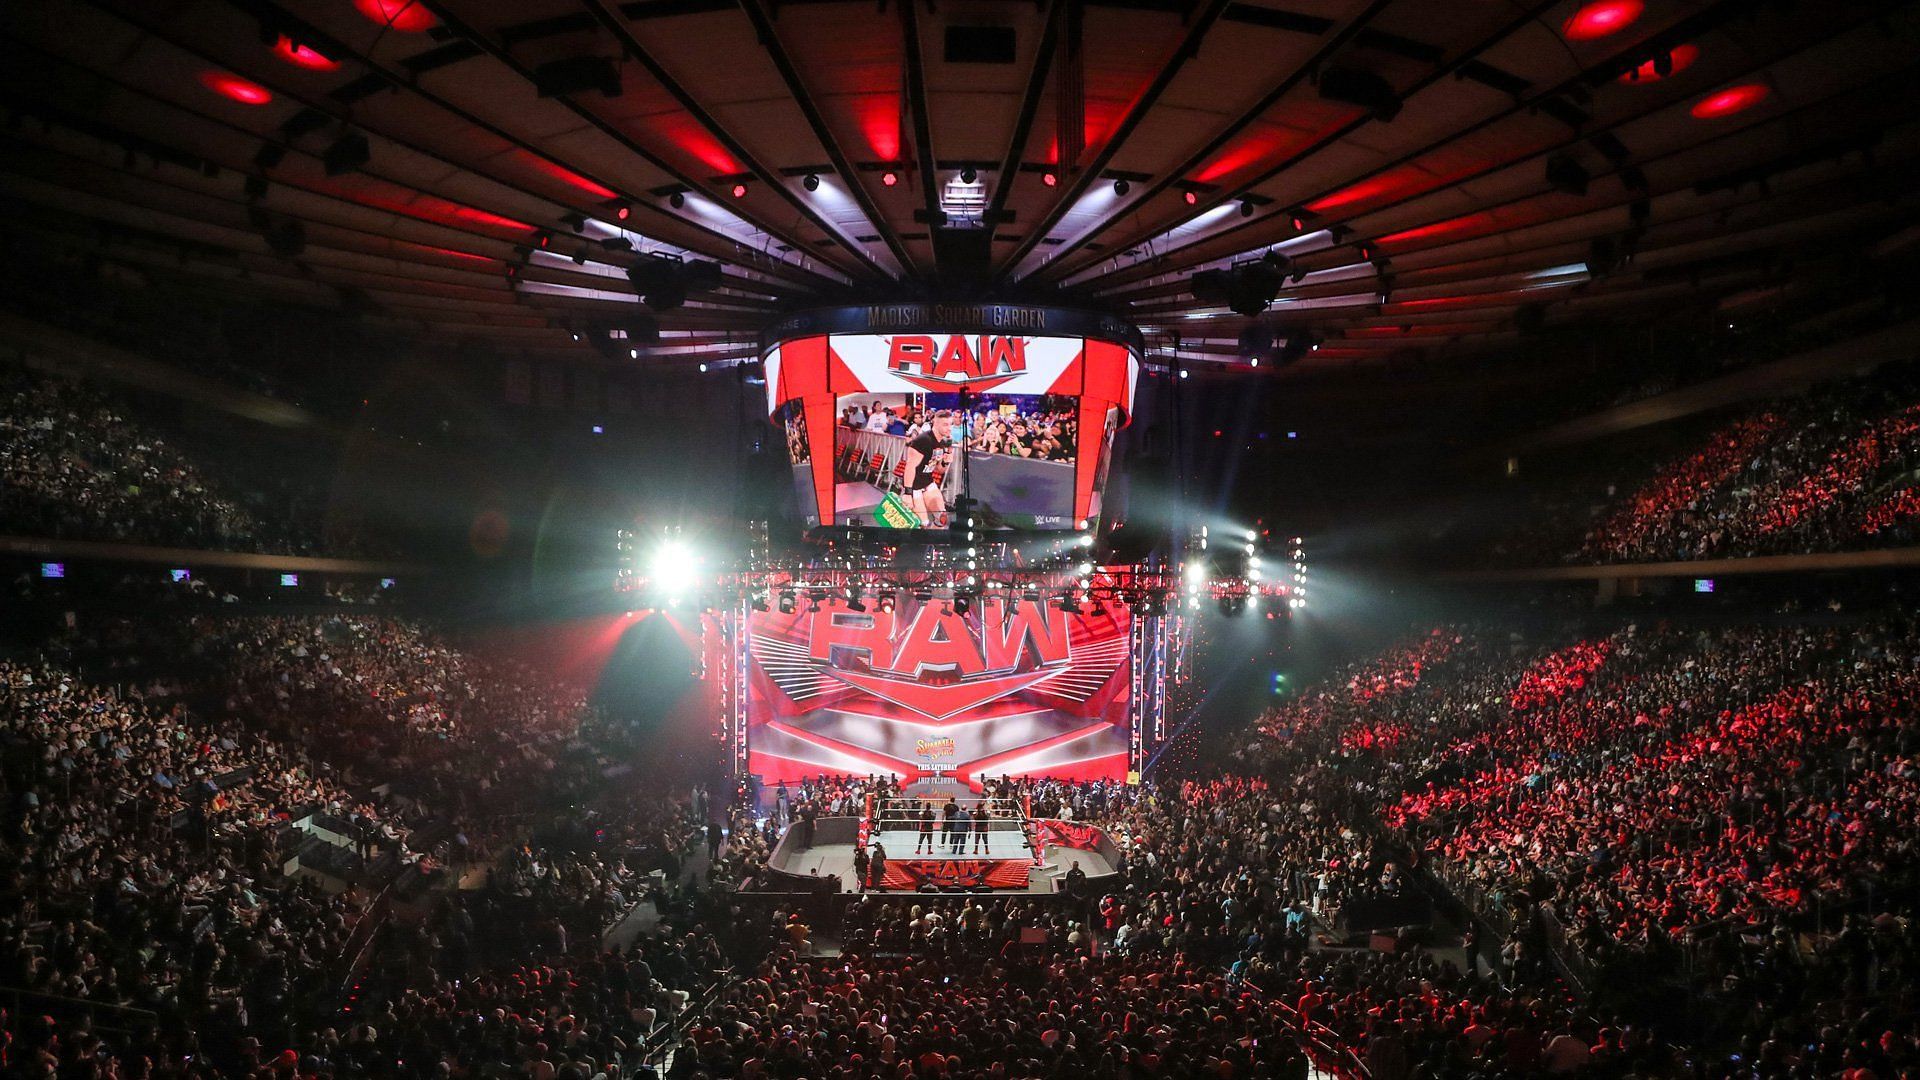 The WWE RAW ring and stage/set inside a packed arena